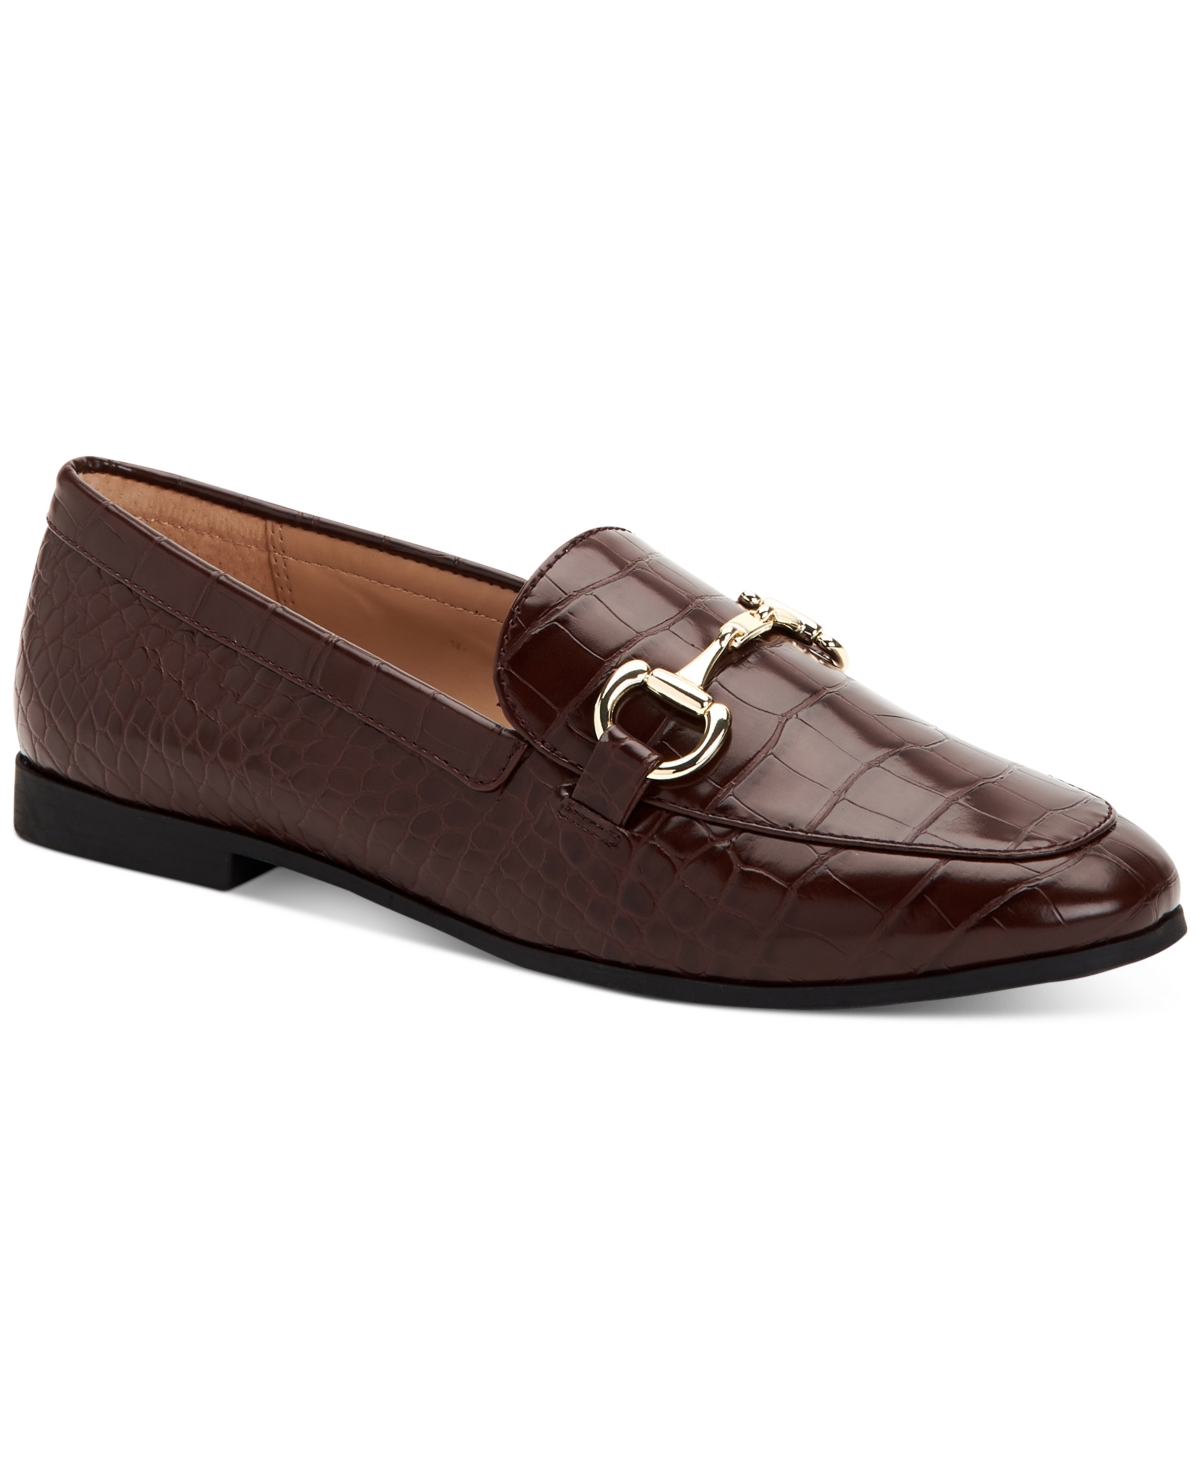 ALFANI WOMEN'S GAYLE LOAFERS, CREATED FOR MACY'S WOMEN'S SHOES